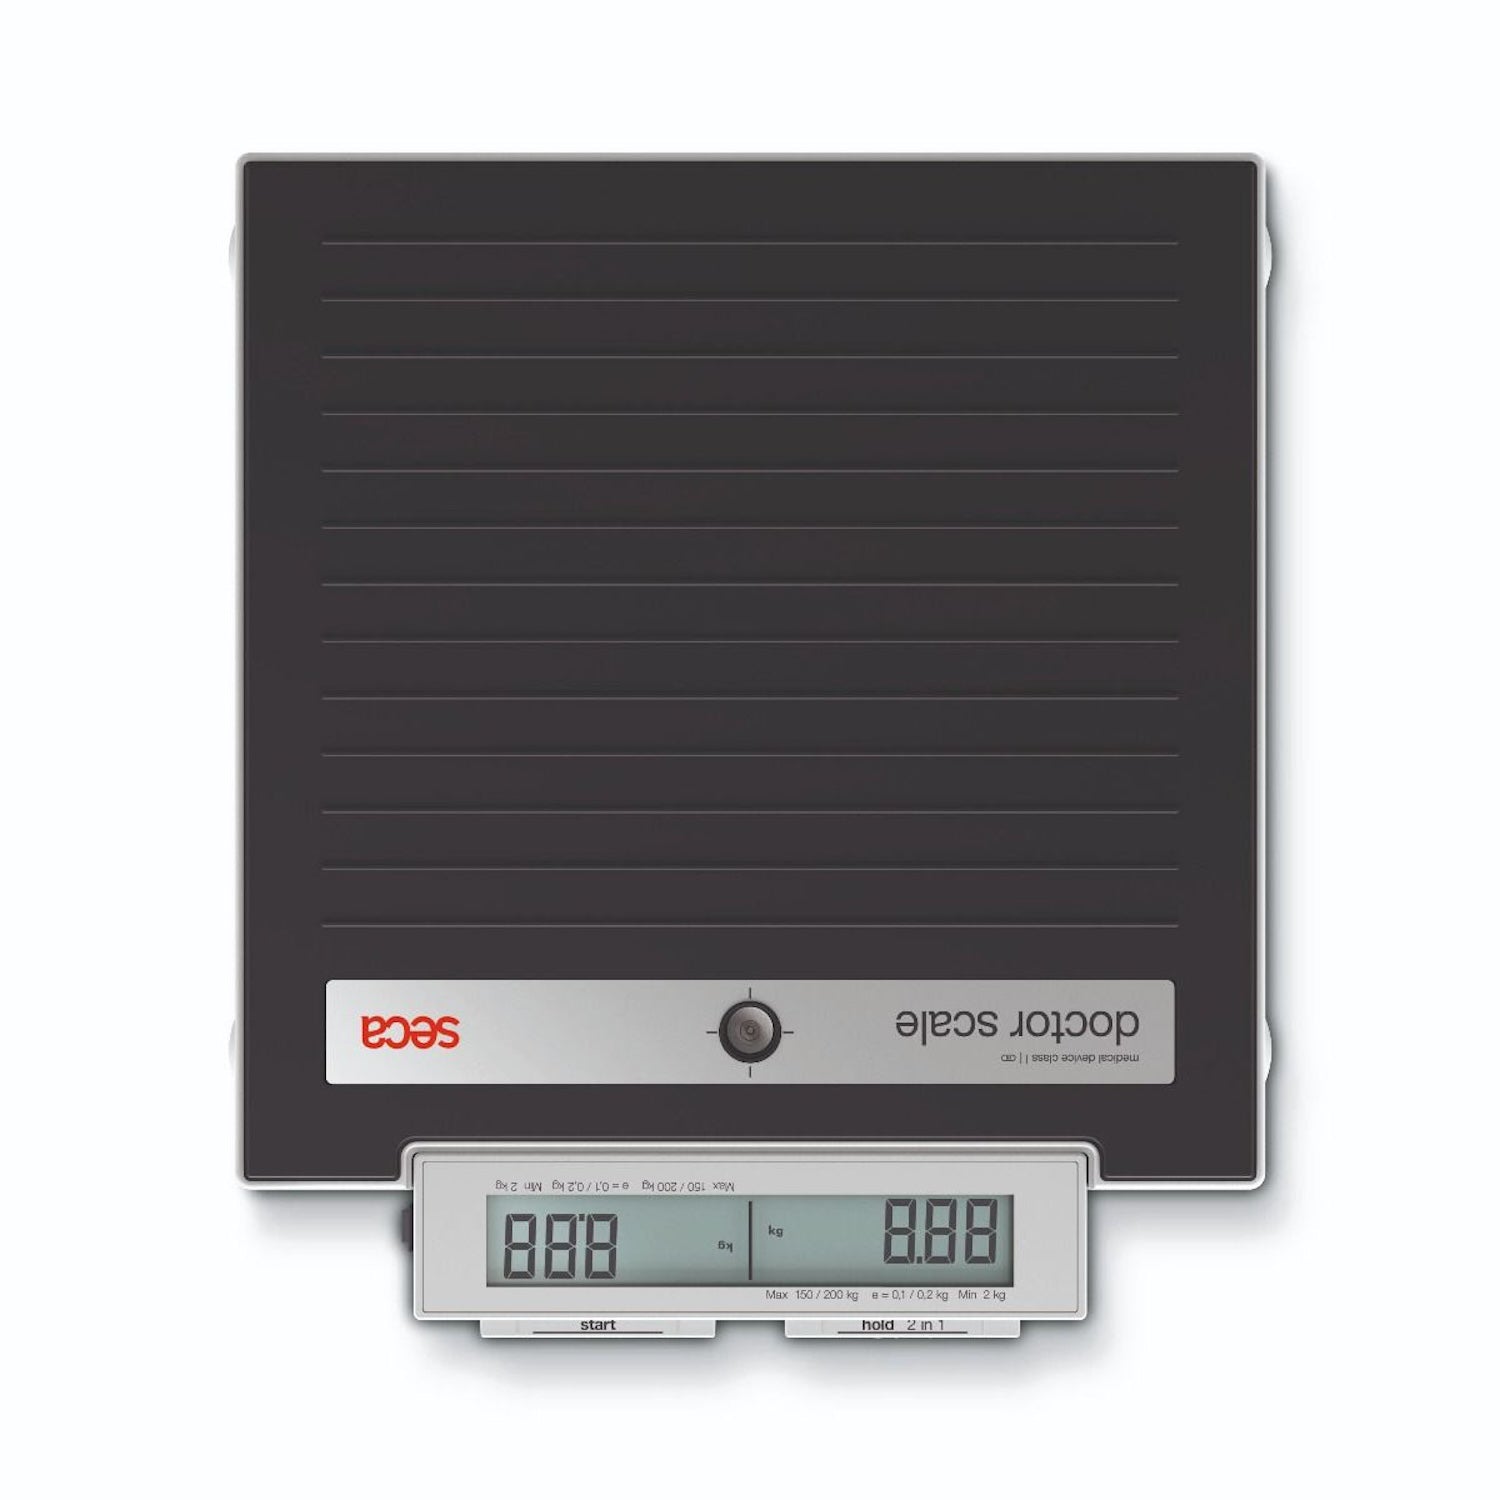 seca 878dr Class III Doctor Electronic Flat Scales (4)